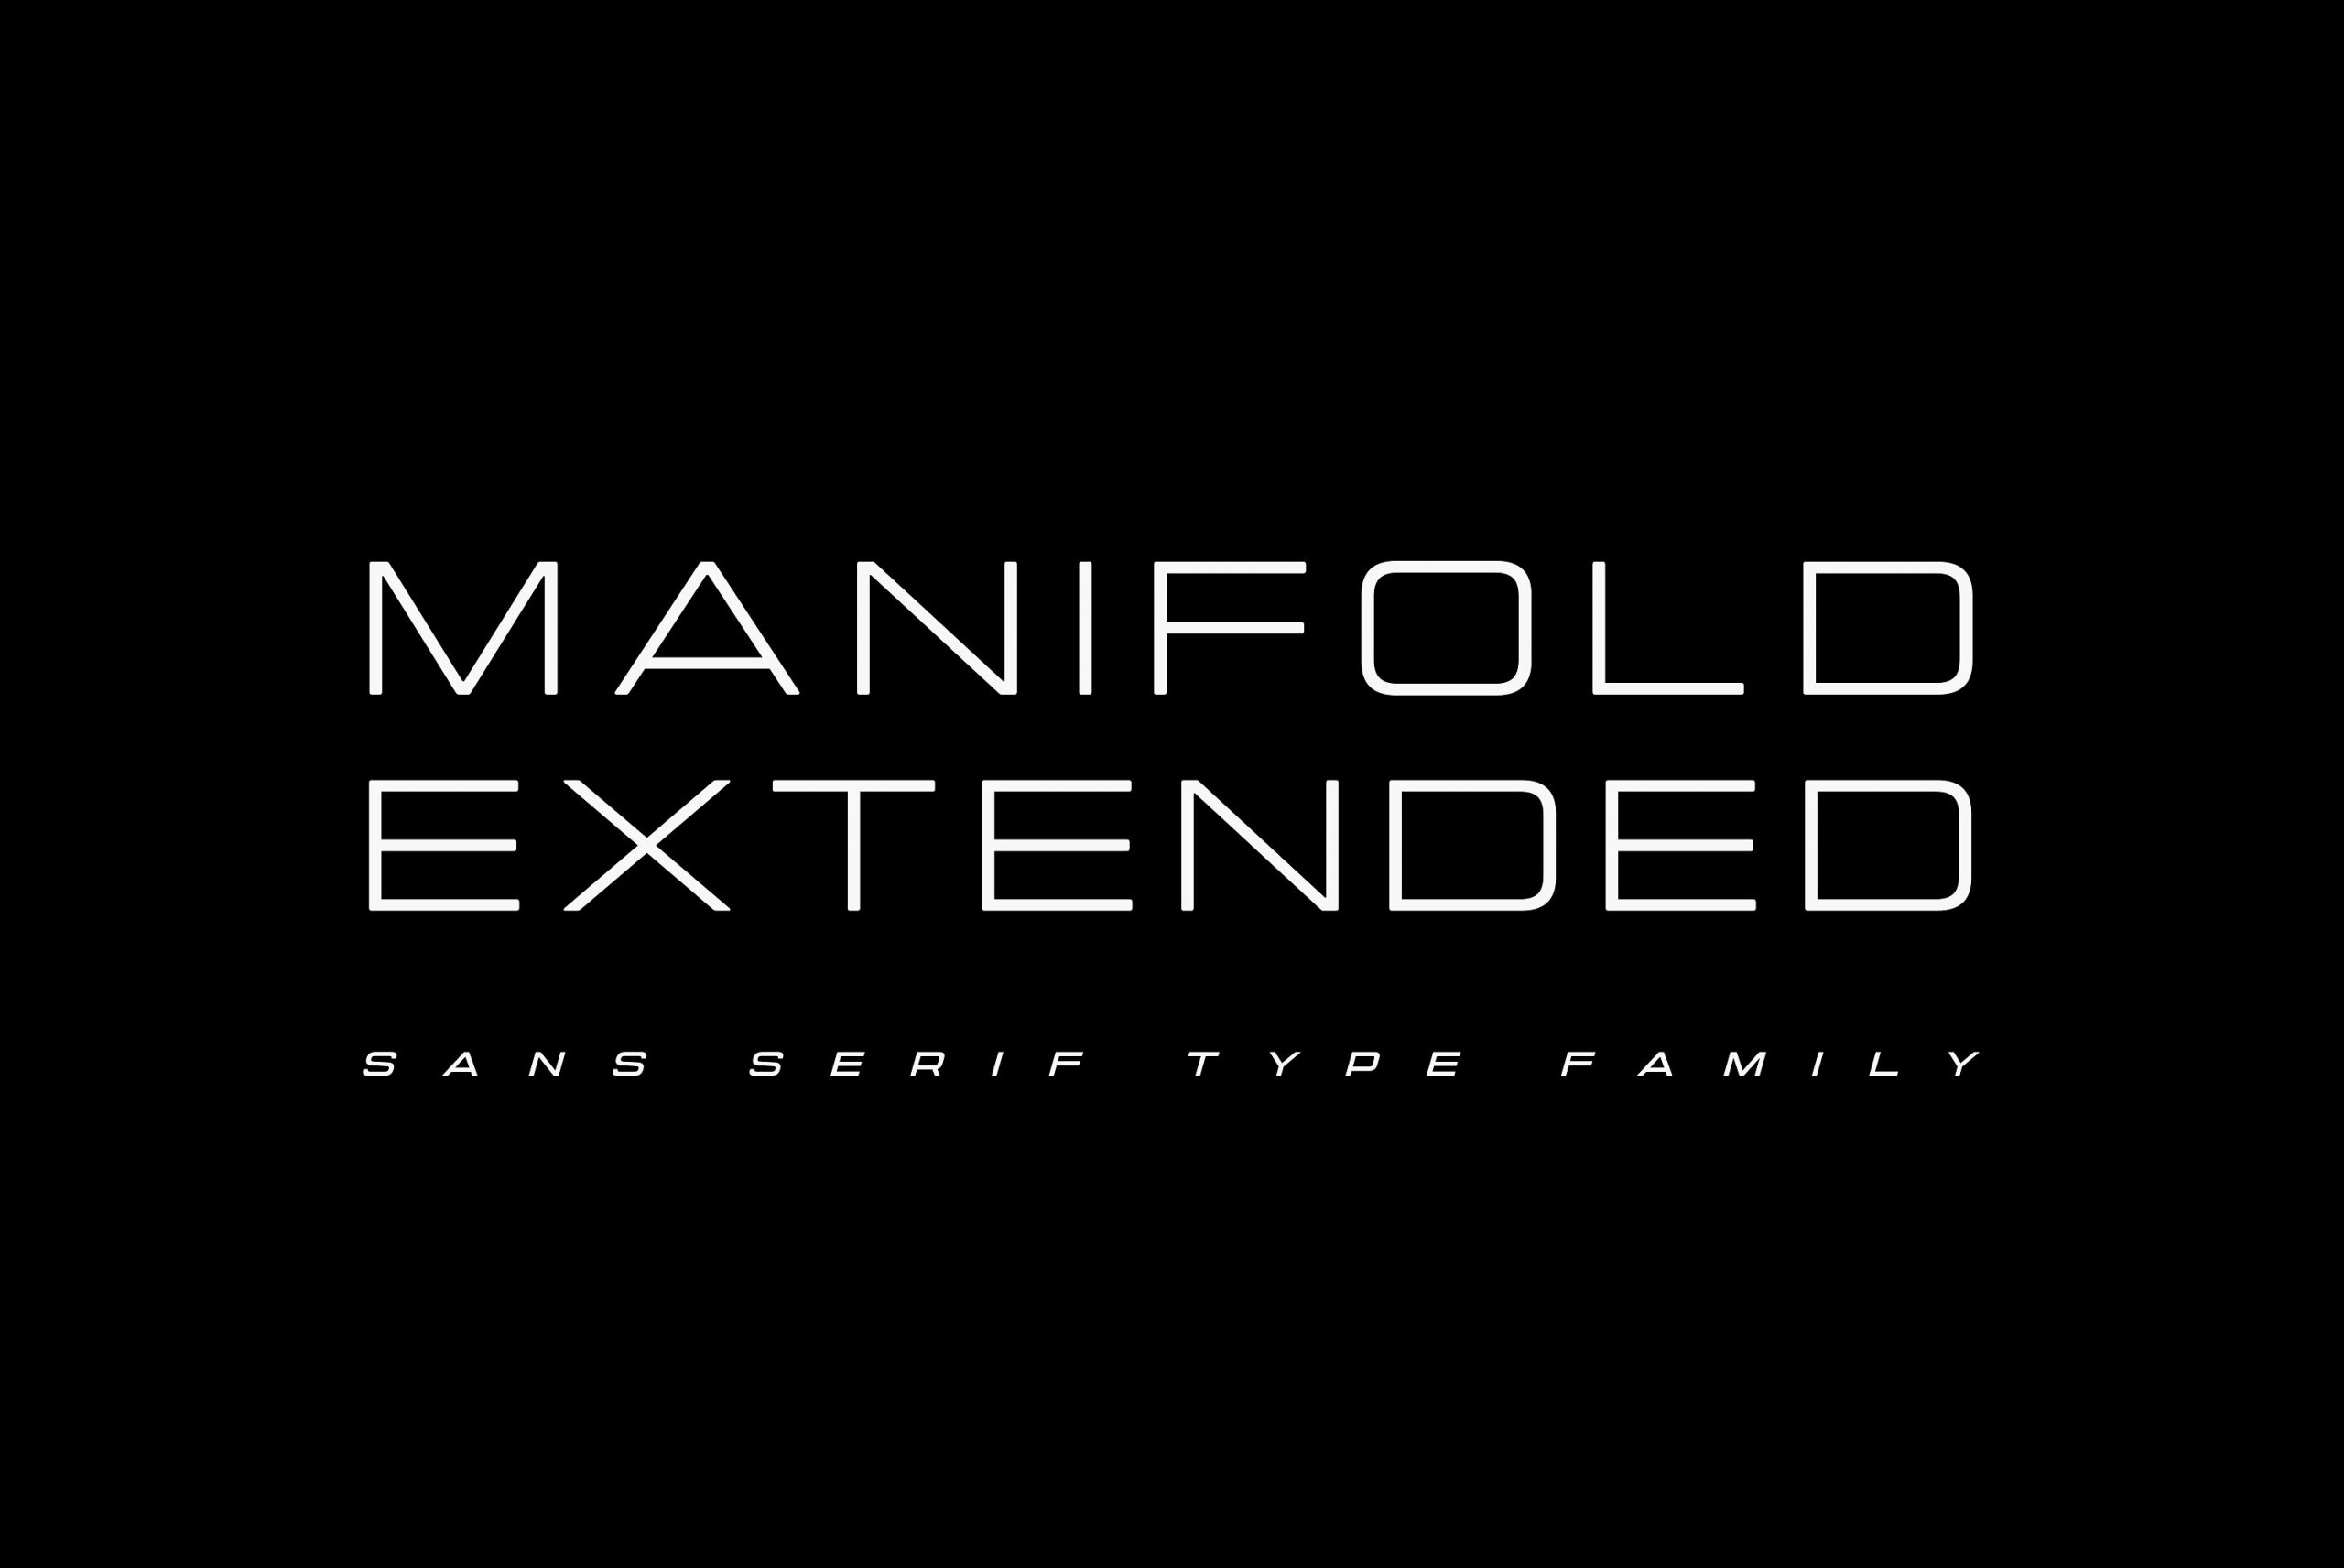 Manifold Extended CF wide sans serif Font Free Download